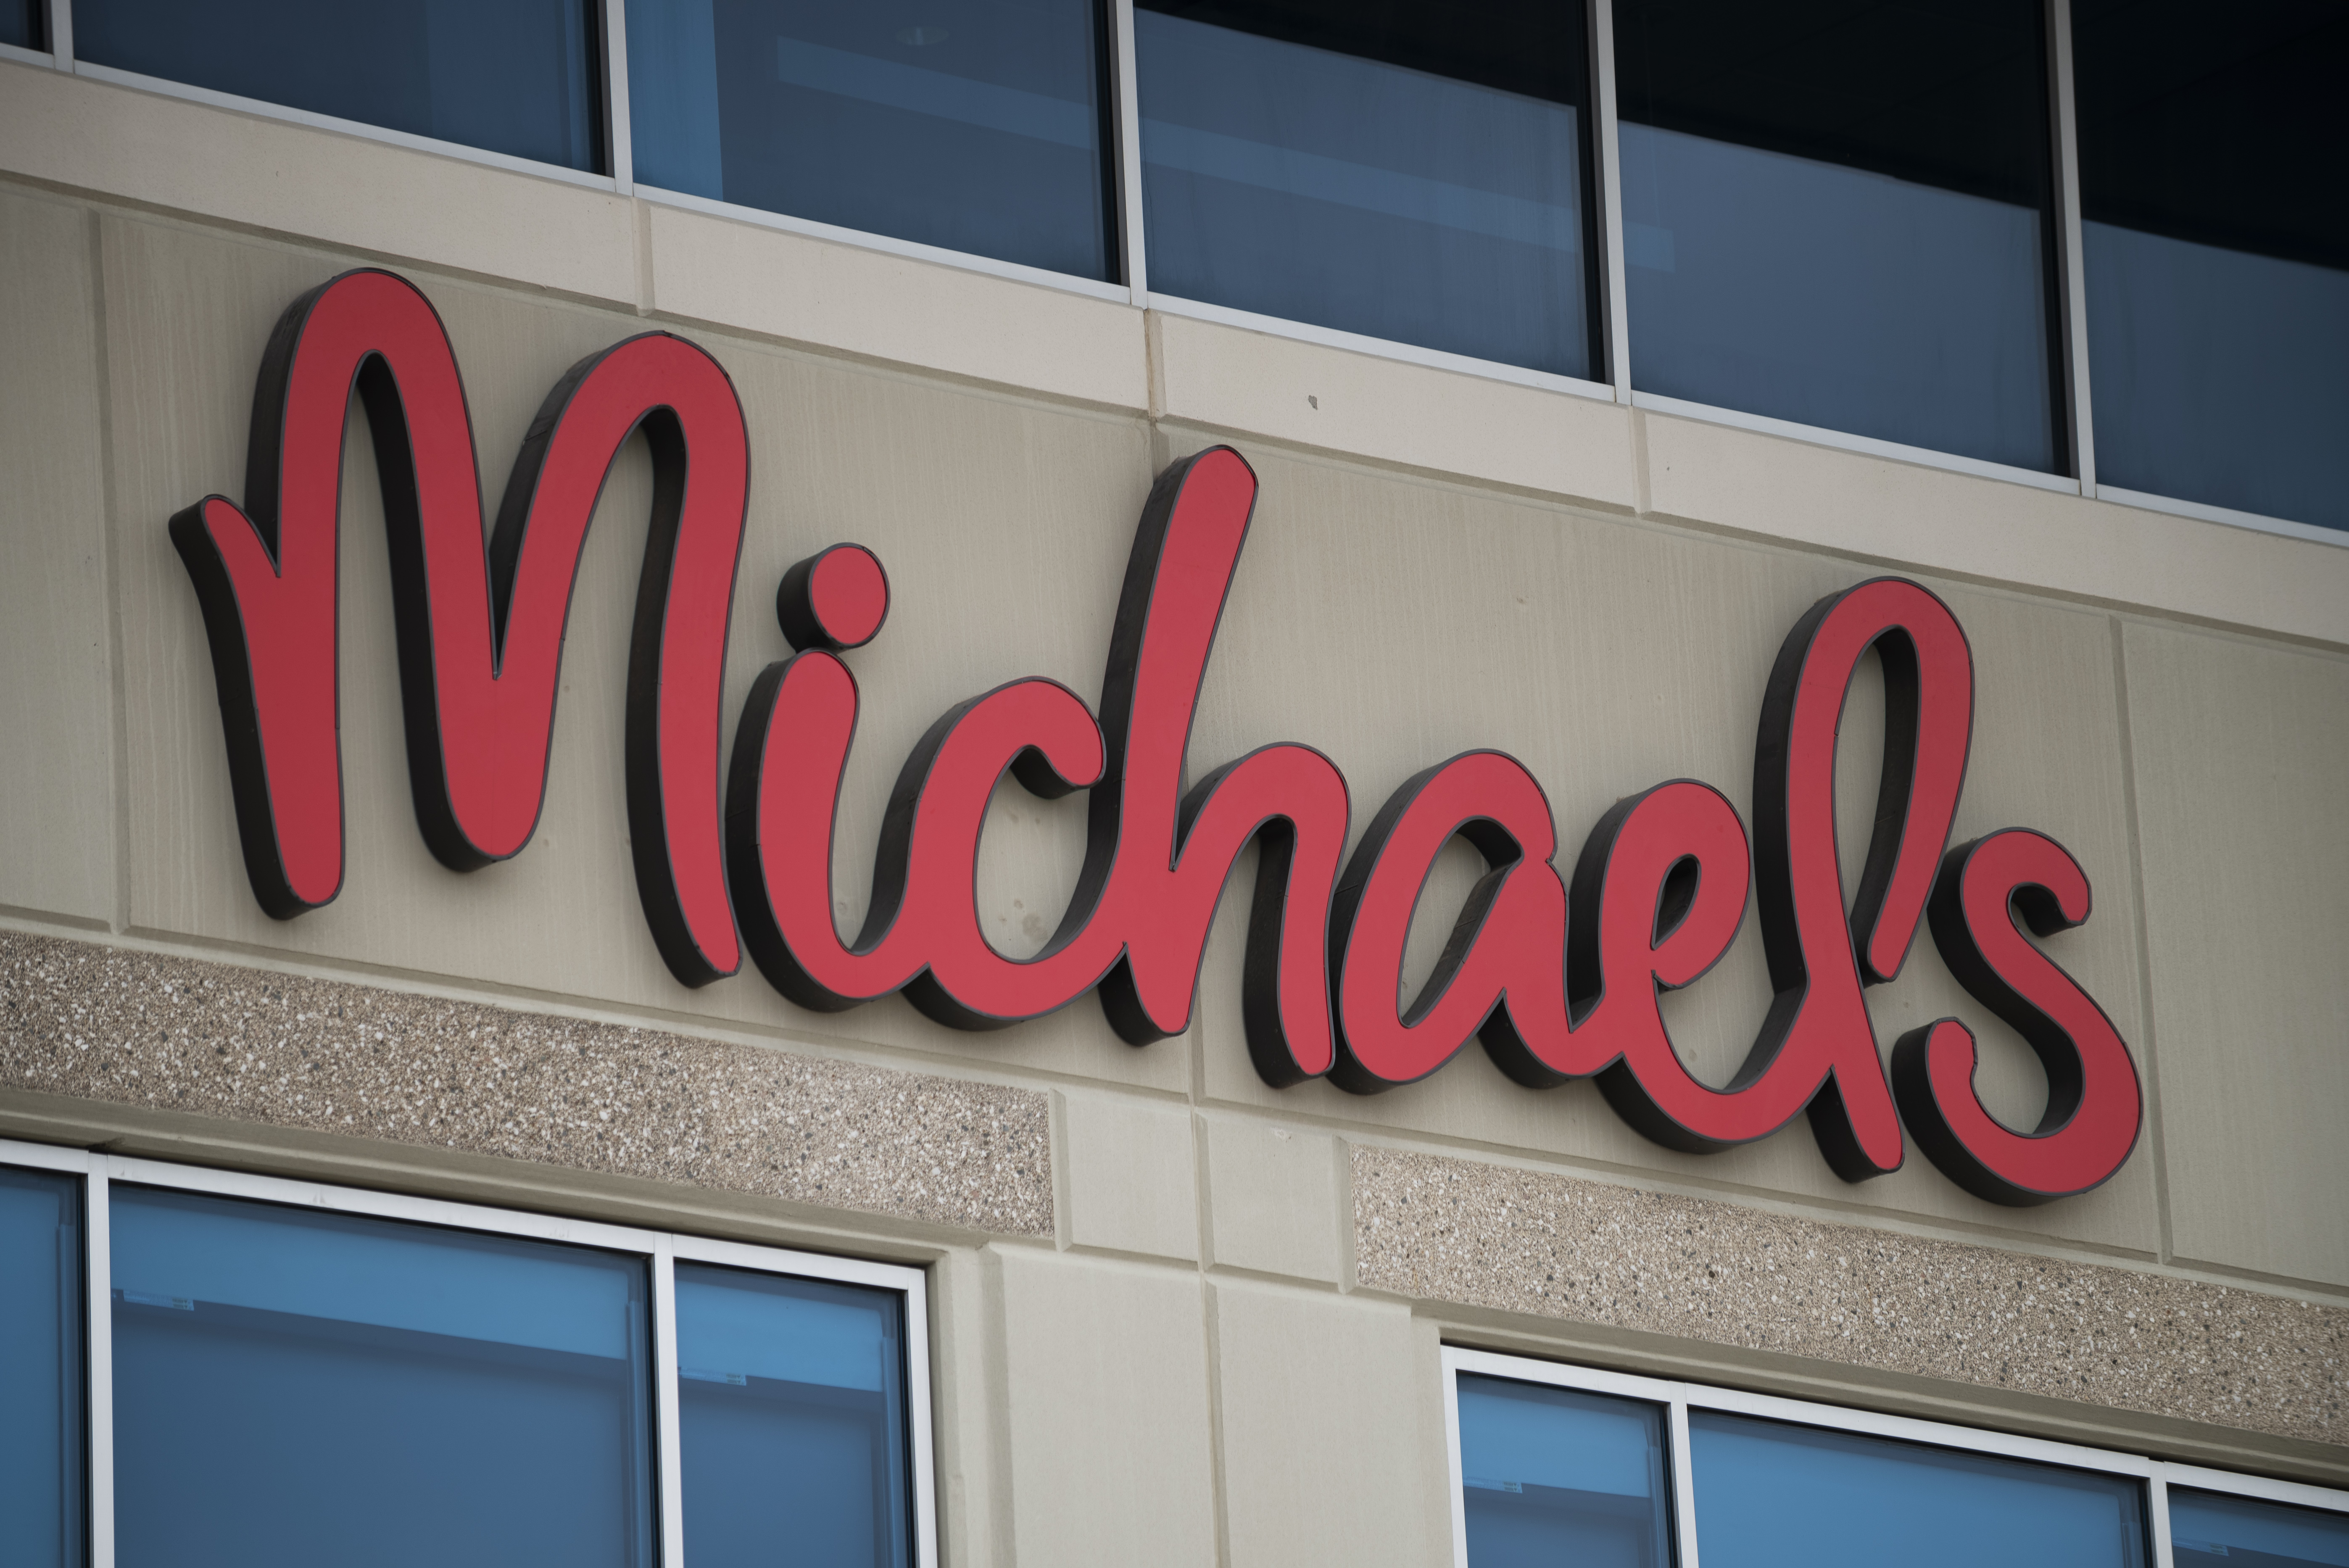 Arts And Crafts Retailer Michaels Cutting 202 Jobs In Fort, 45% OFF